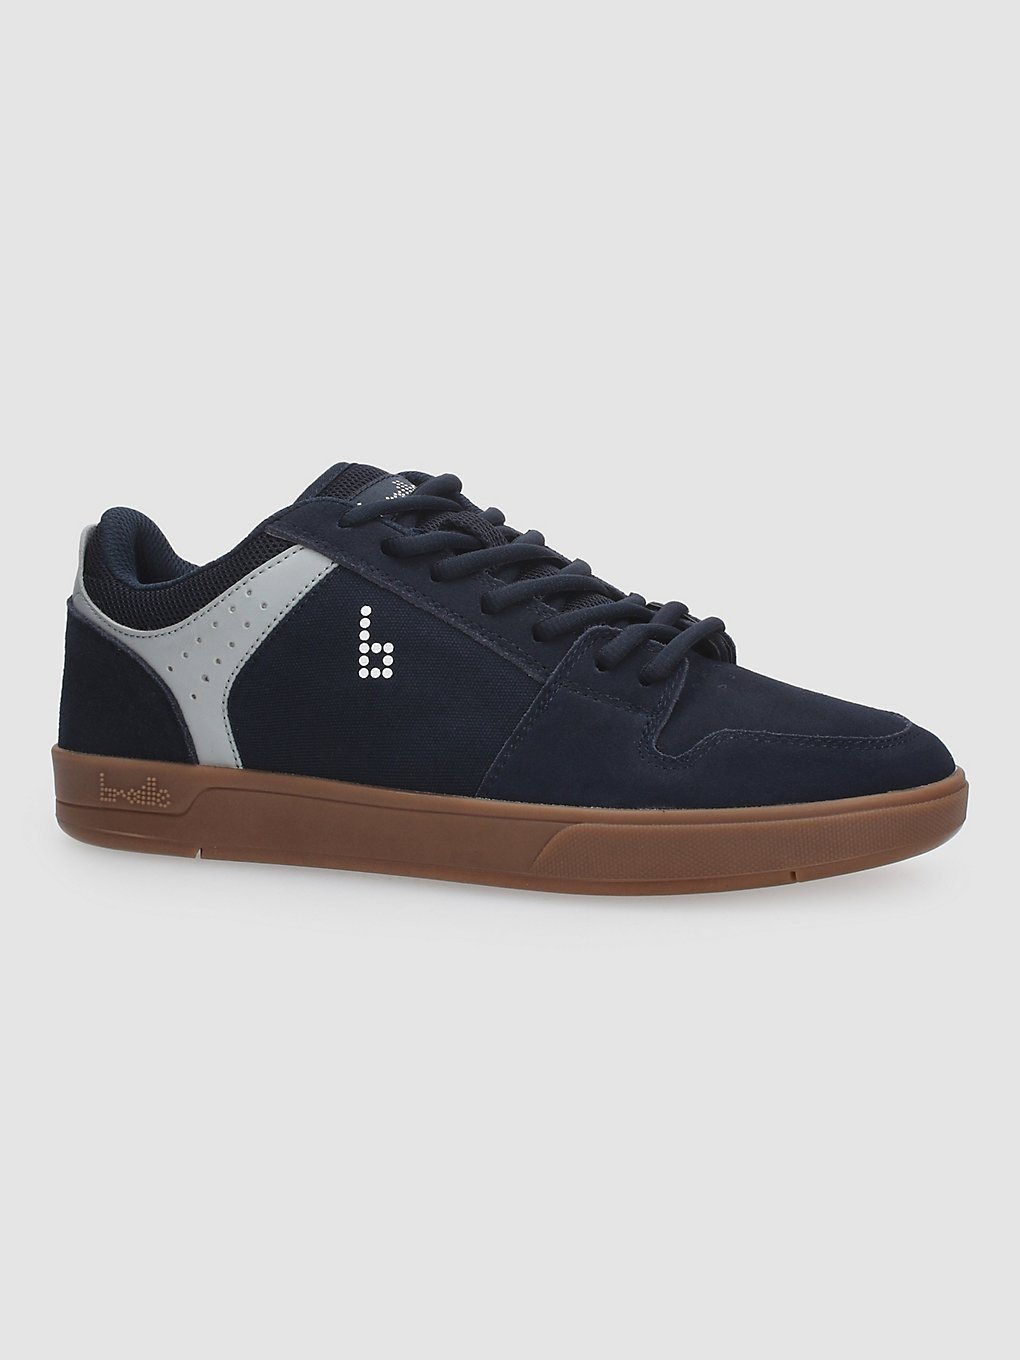 Braille Skateboarding Red Lodge Skate Shoes navy with gum kaufen